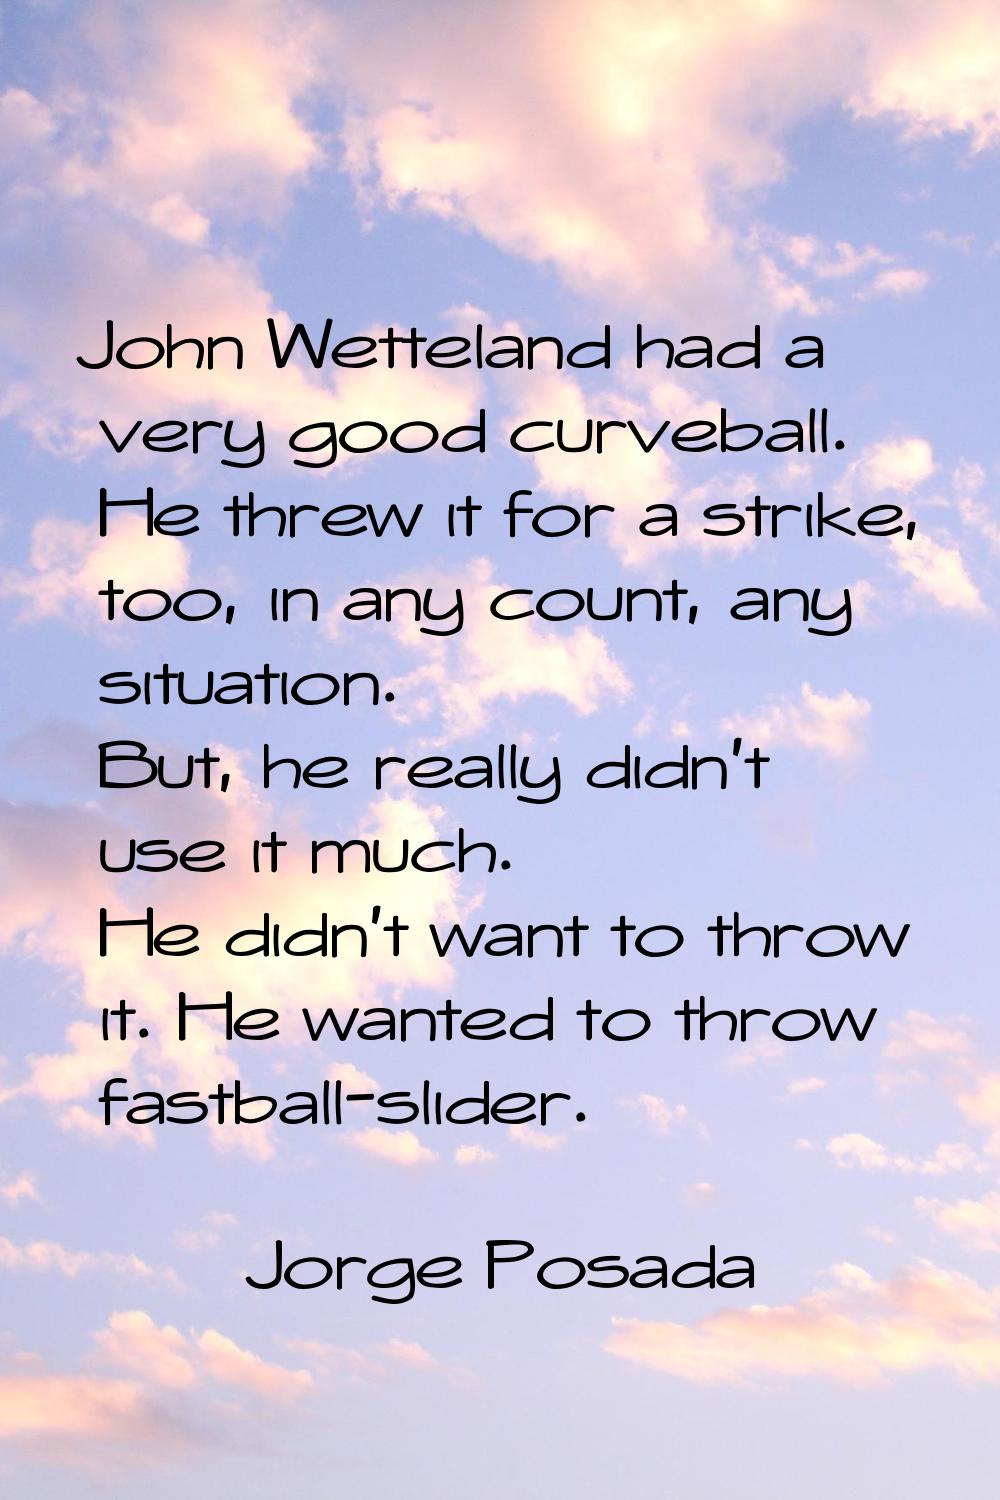 John Wetteland had a very good curveball. He threw it for a strike, too, in any count, any situatio